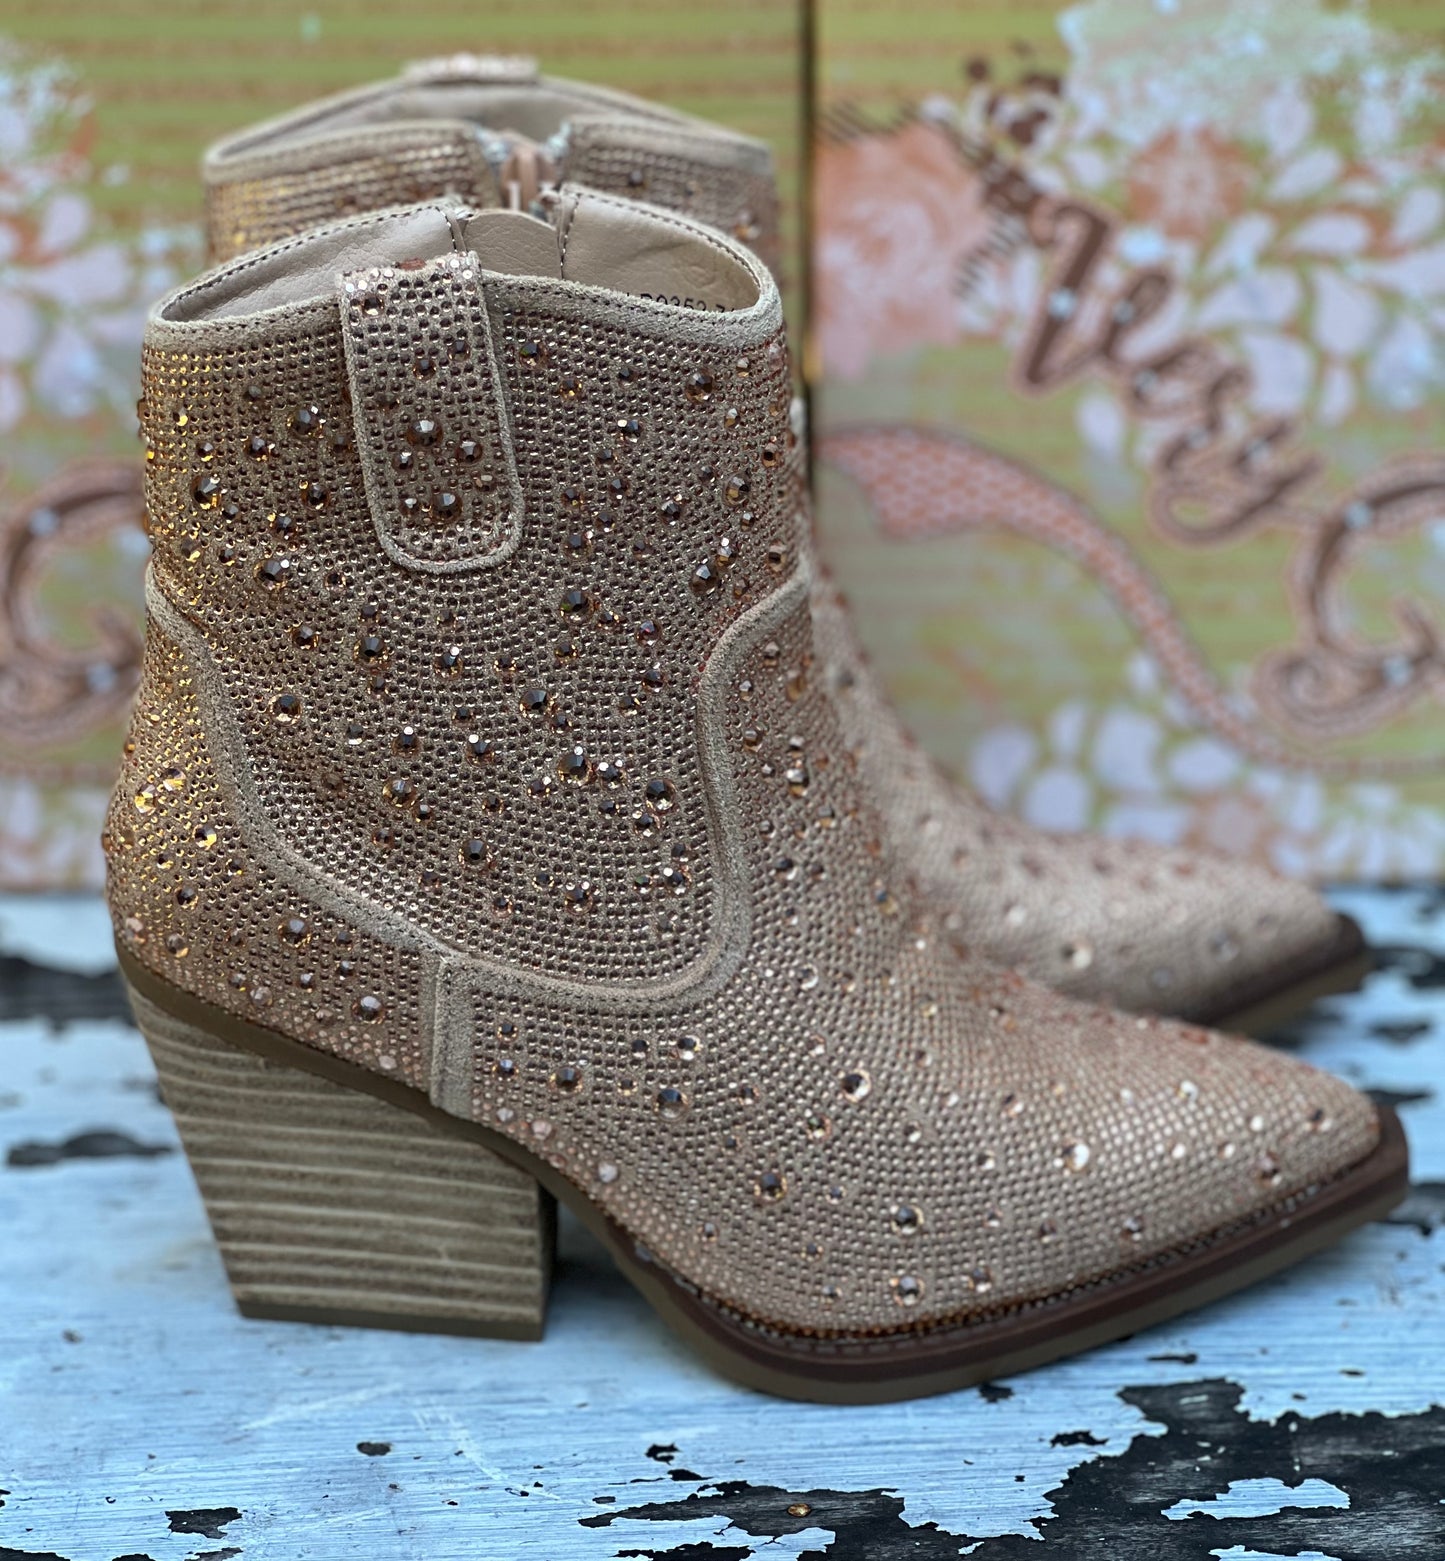 Very G rose gold “Kady” bling boots